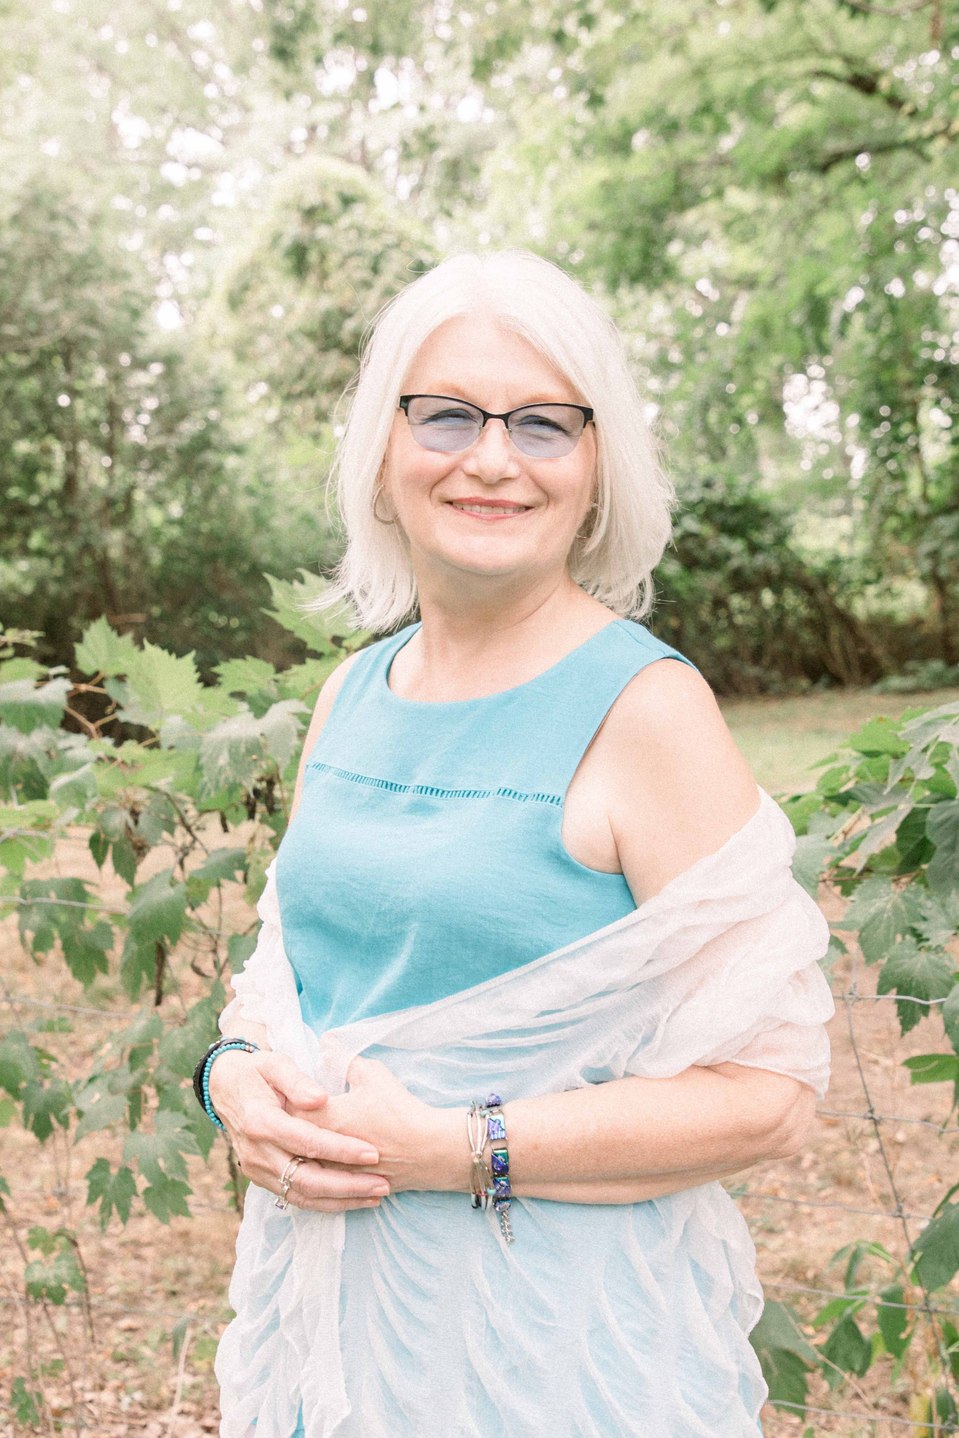 Outdoor portrait of older woman with glasses smiling away from camera, Niagara family photographer, family photography, Niagara portrait photographer, portrait photography, Emily VanderBeek Photography.